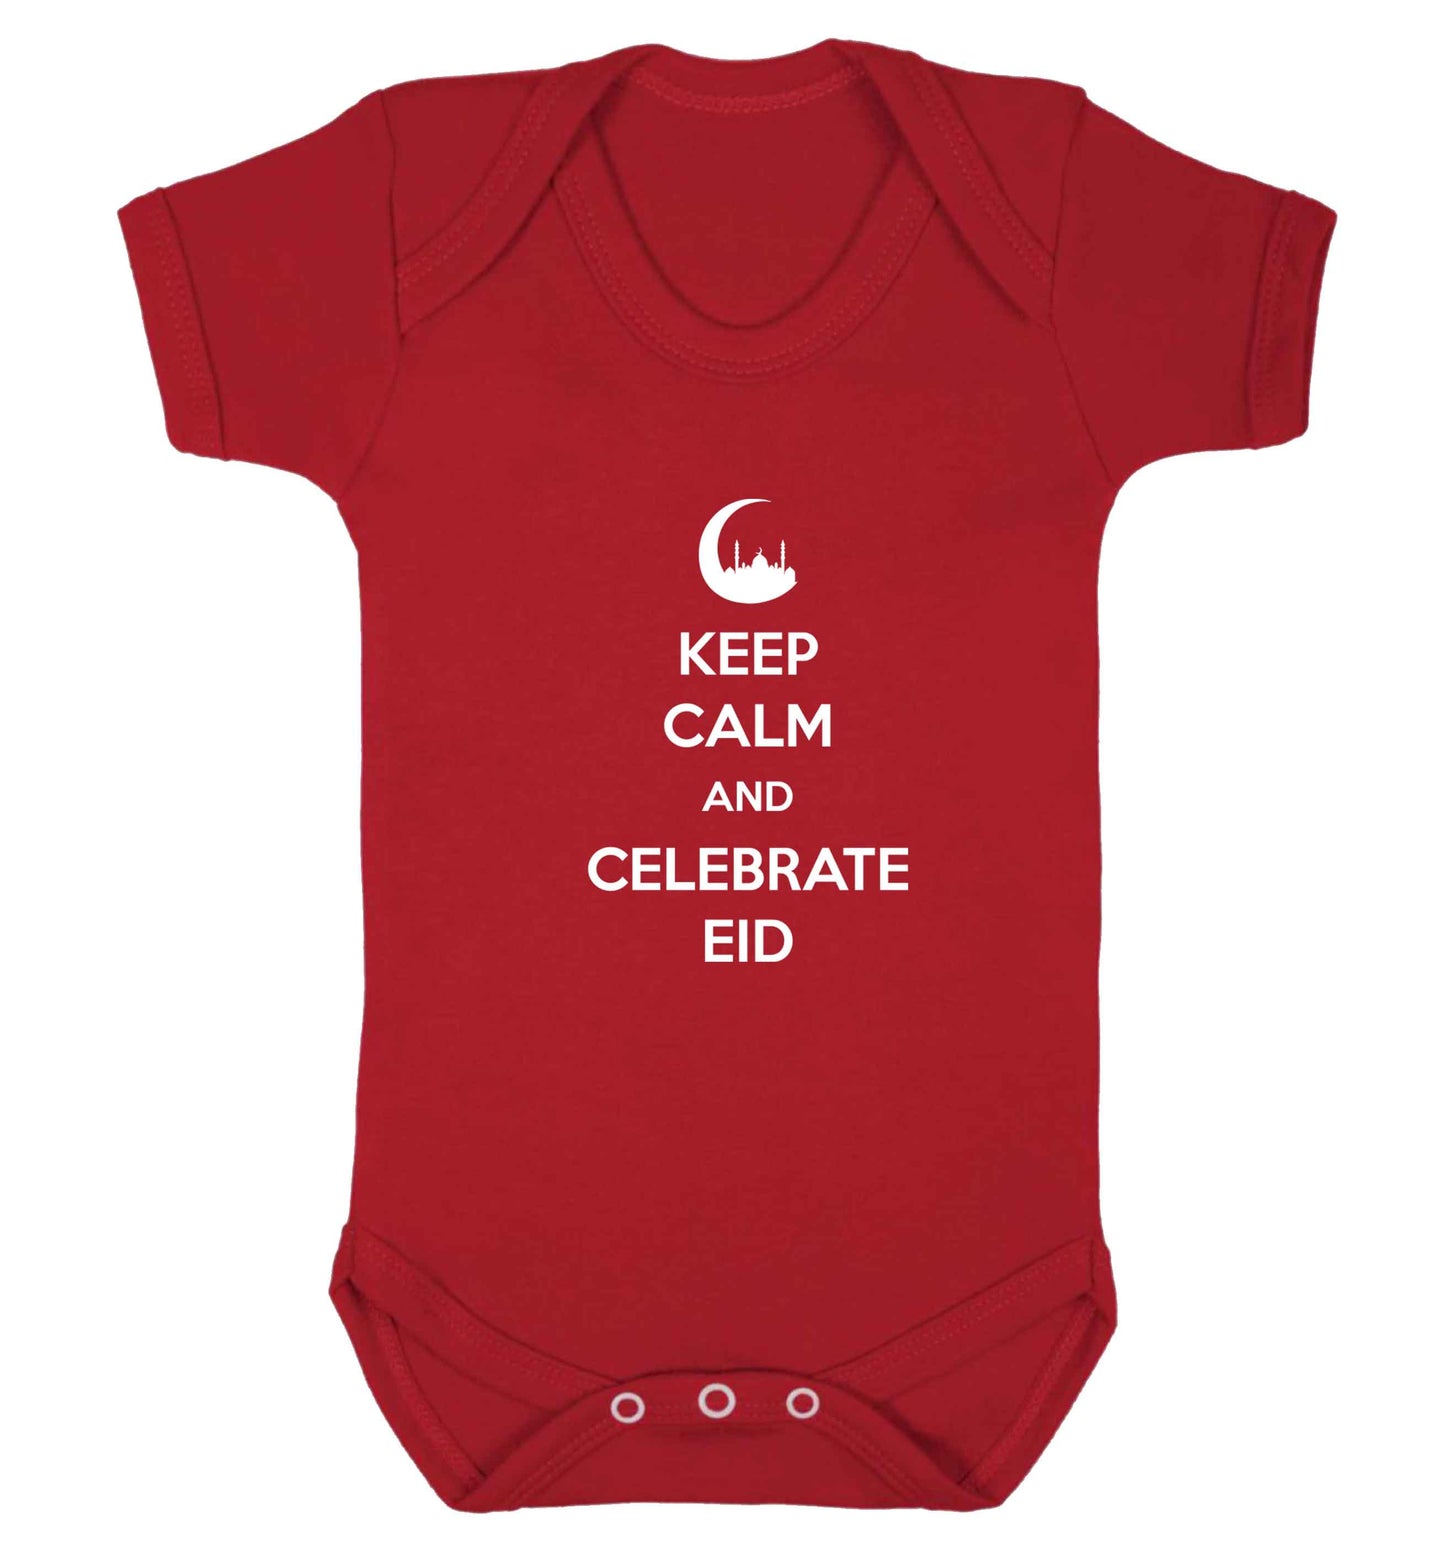 Keep calm and celebrate Eid baby vest red 18-24 months